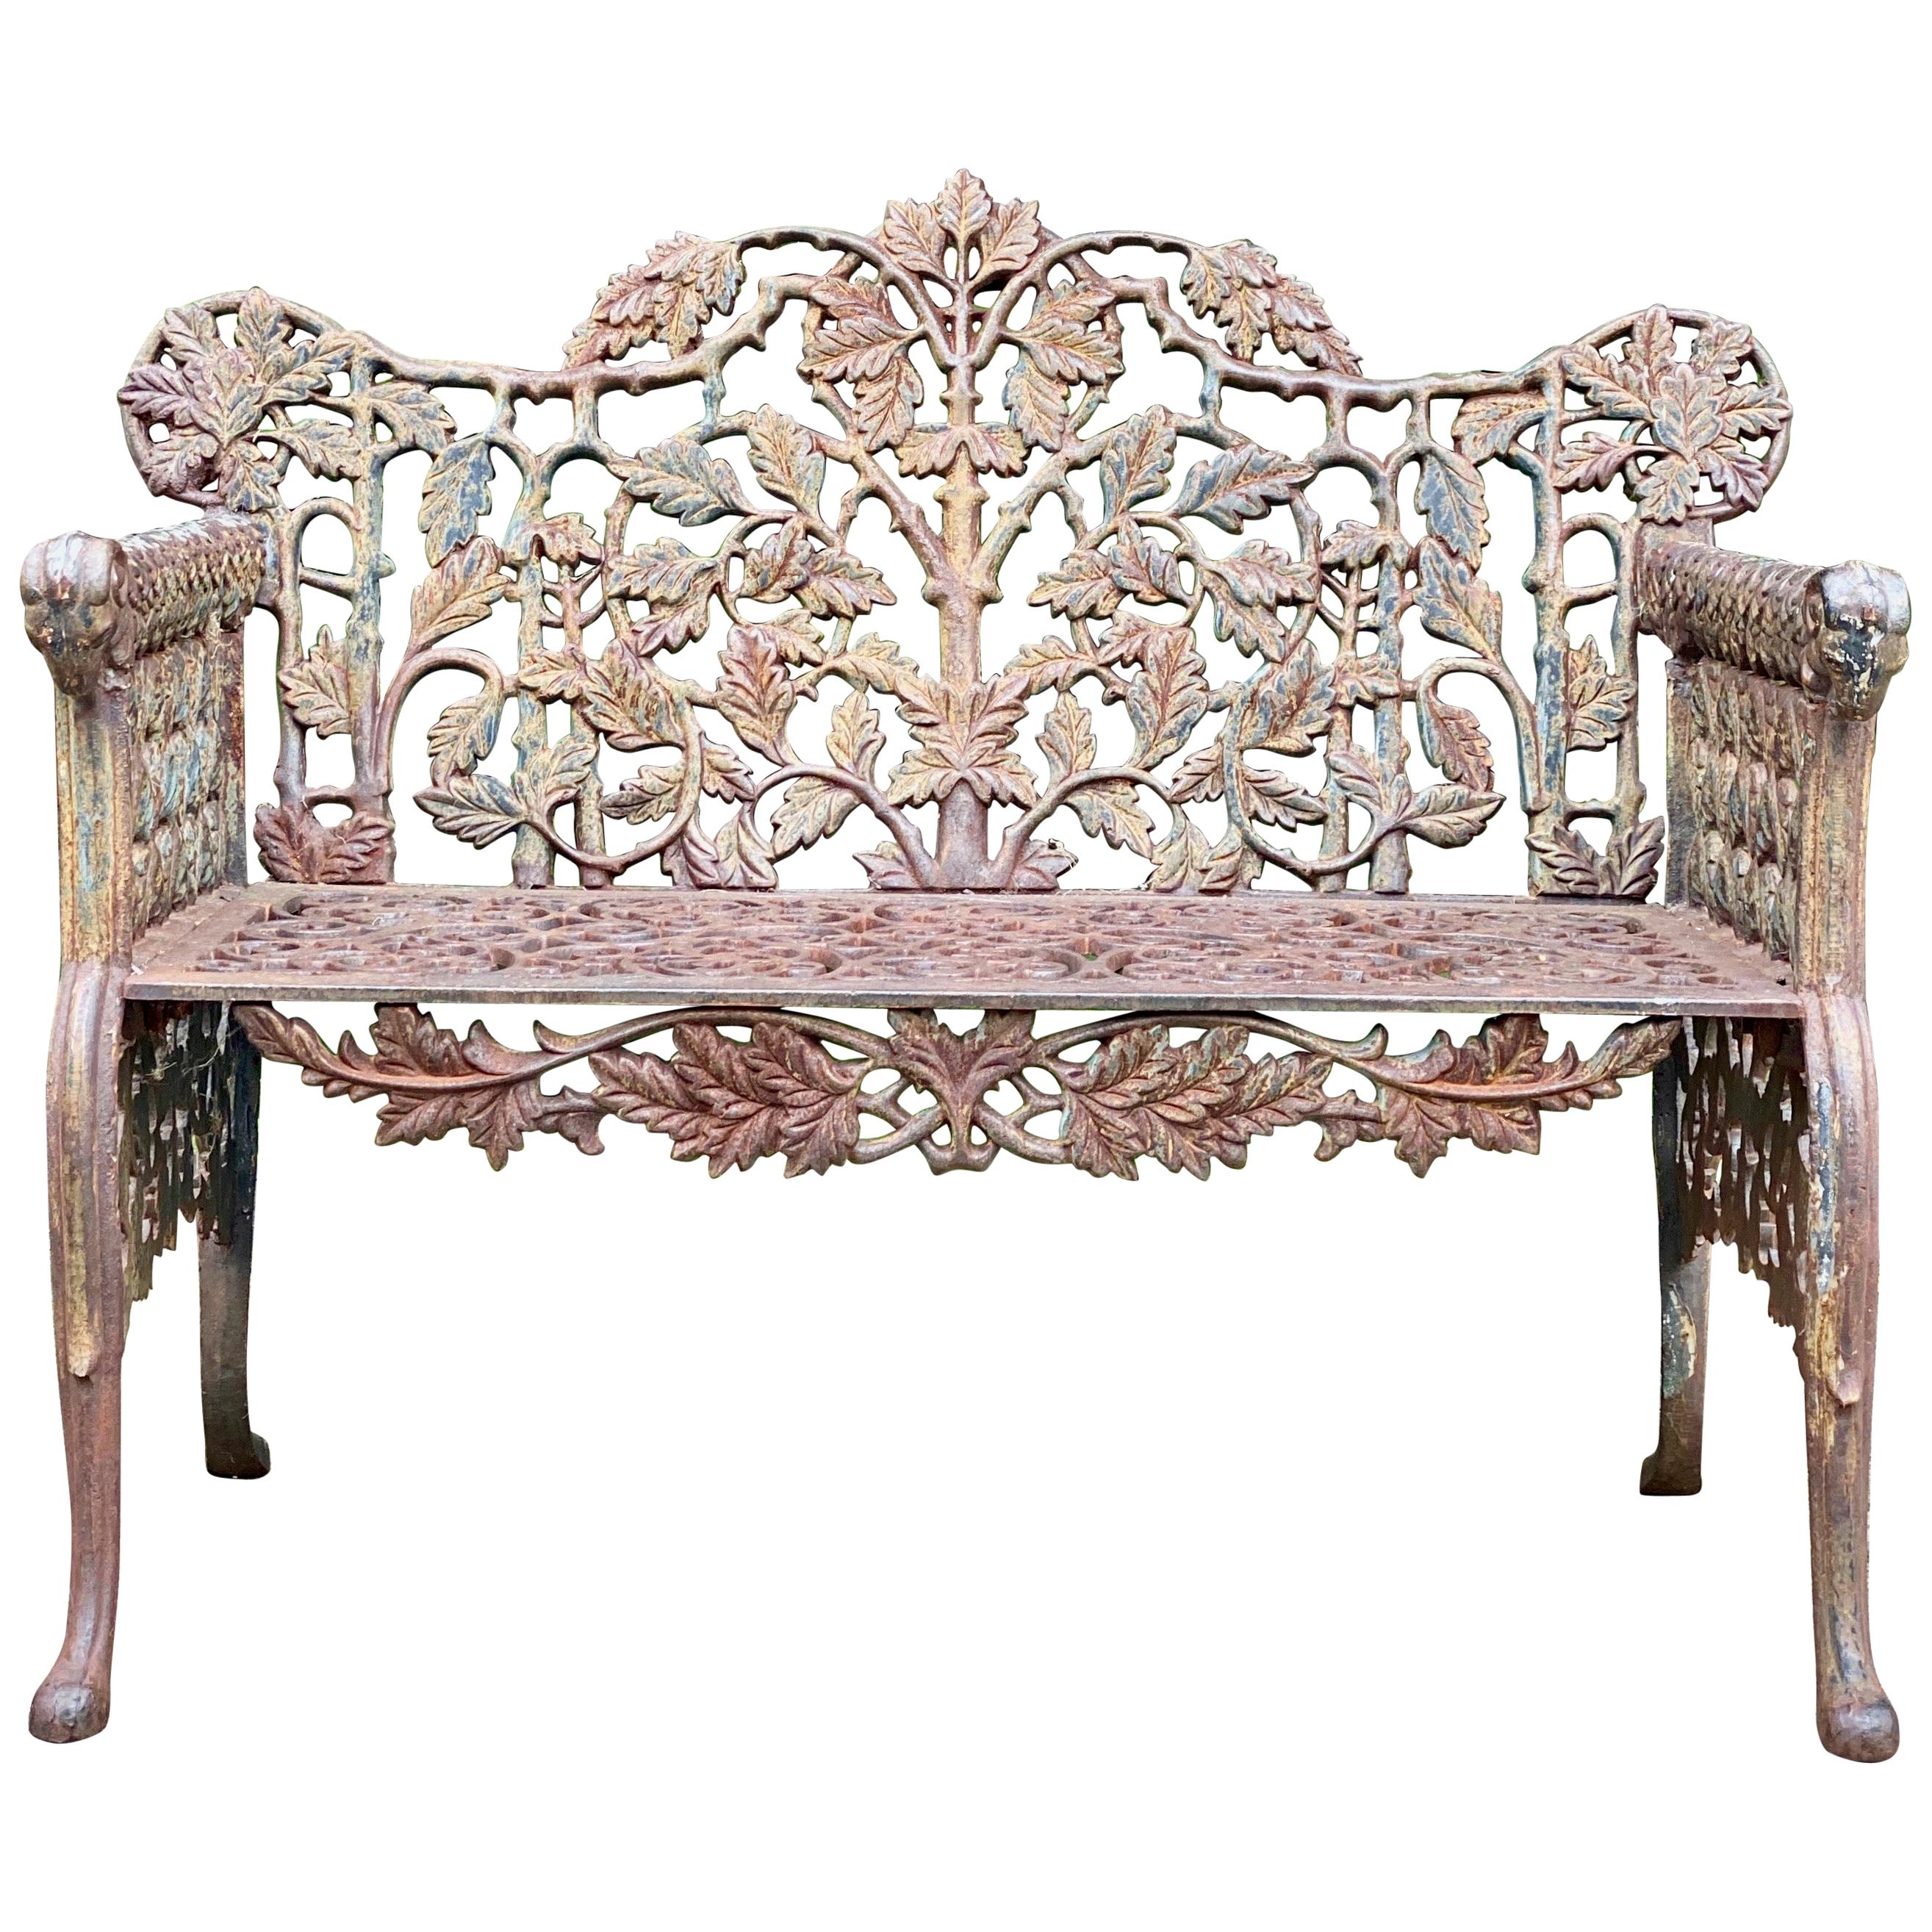 Beautiful Victorian style cast iron garden bench seat

Beautiful heavy Victorian style cast iron garden bench, arms terminating with rams heads with oak leaf pattern to back with gothic style lattice work to sides, front apron with scrolling